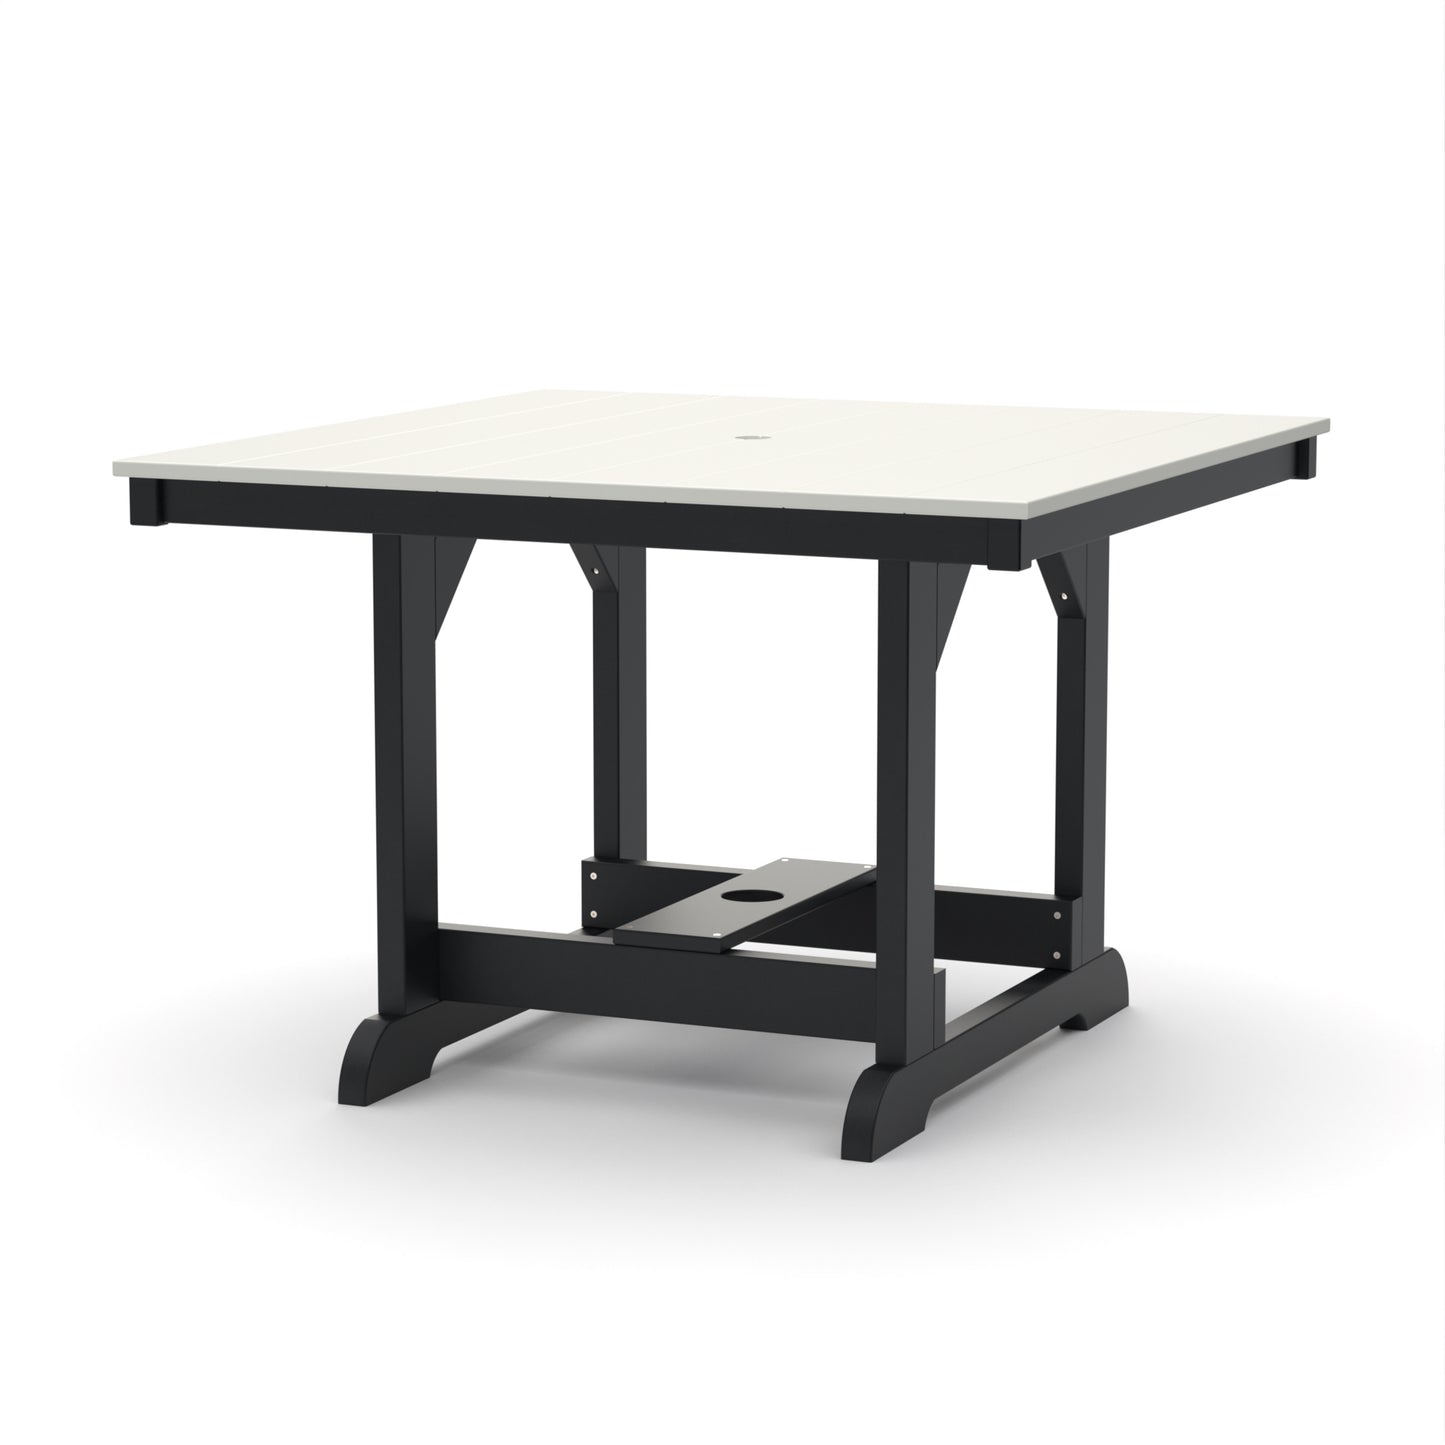 Wildridge Heritage Recycled Plastic Outdoor 44x44 Dining Table - LEAD TIME TO SHIP 6 WEEKS OR LESS